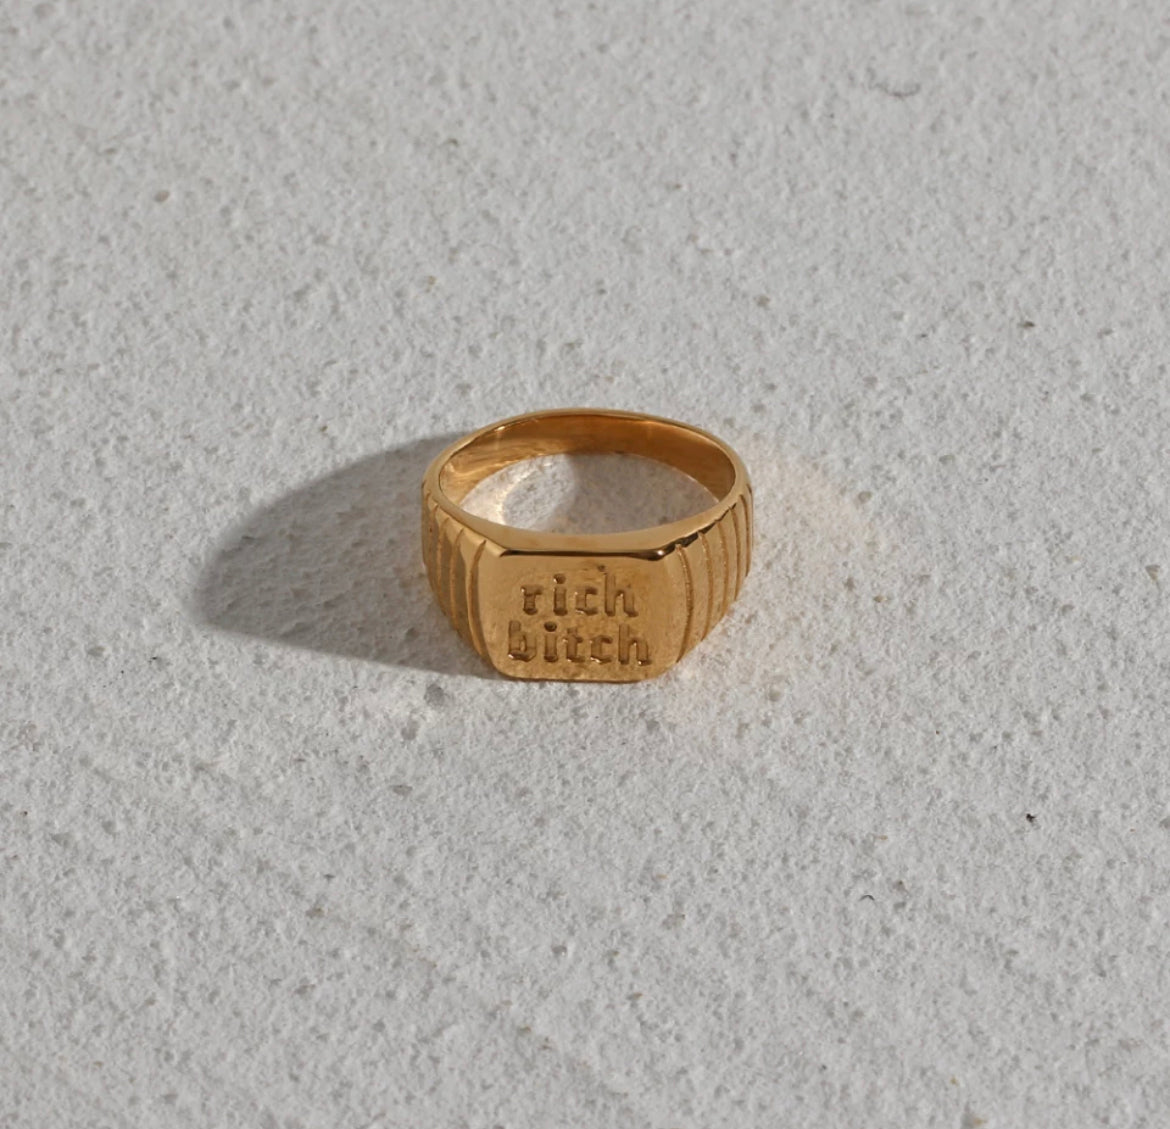 Engraved Rich Bitch Ring